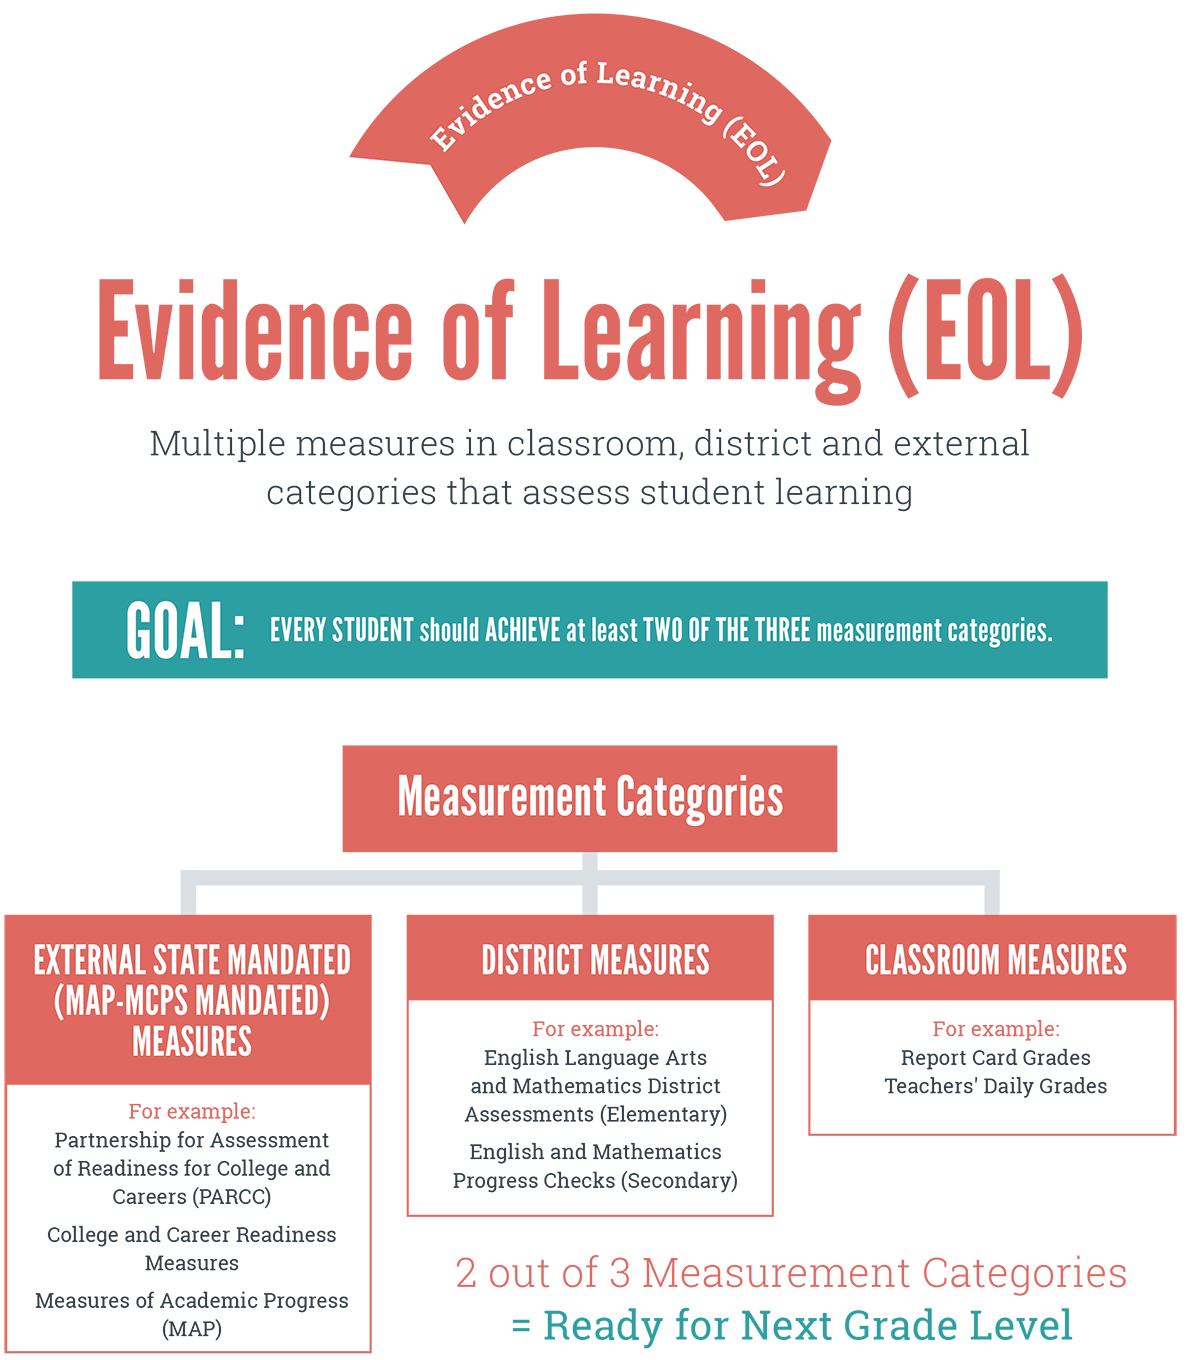 1. Evidence of Learning (EOL) graphic